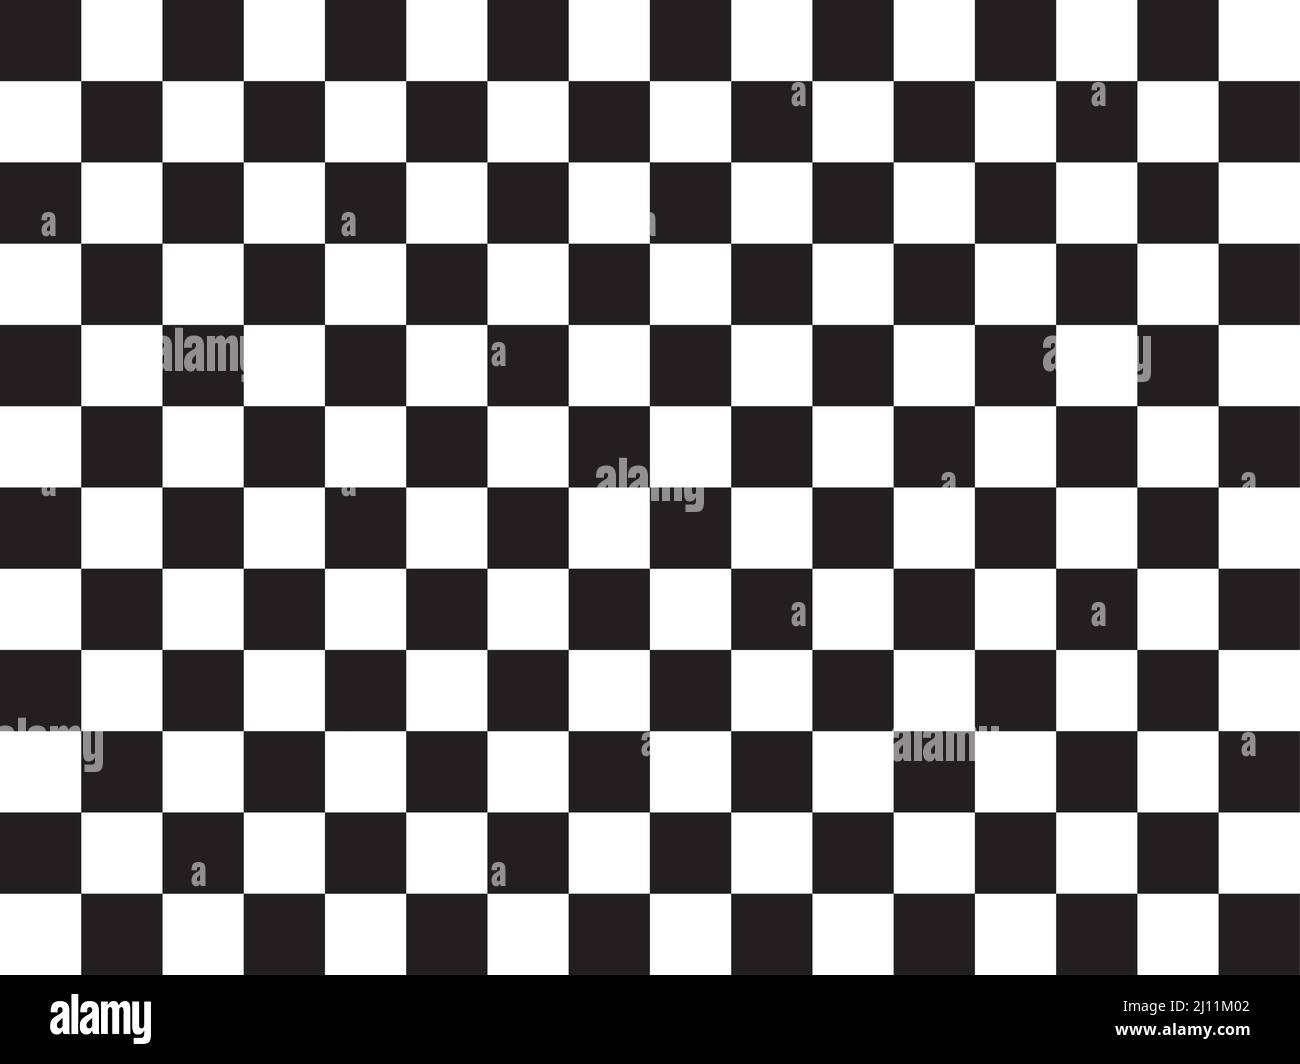 Black and white checkered chessboard abstract background pattern Stock Vector